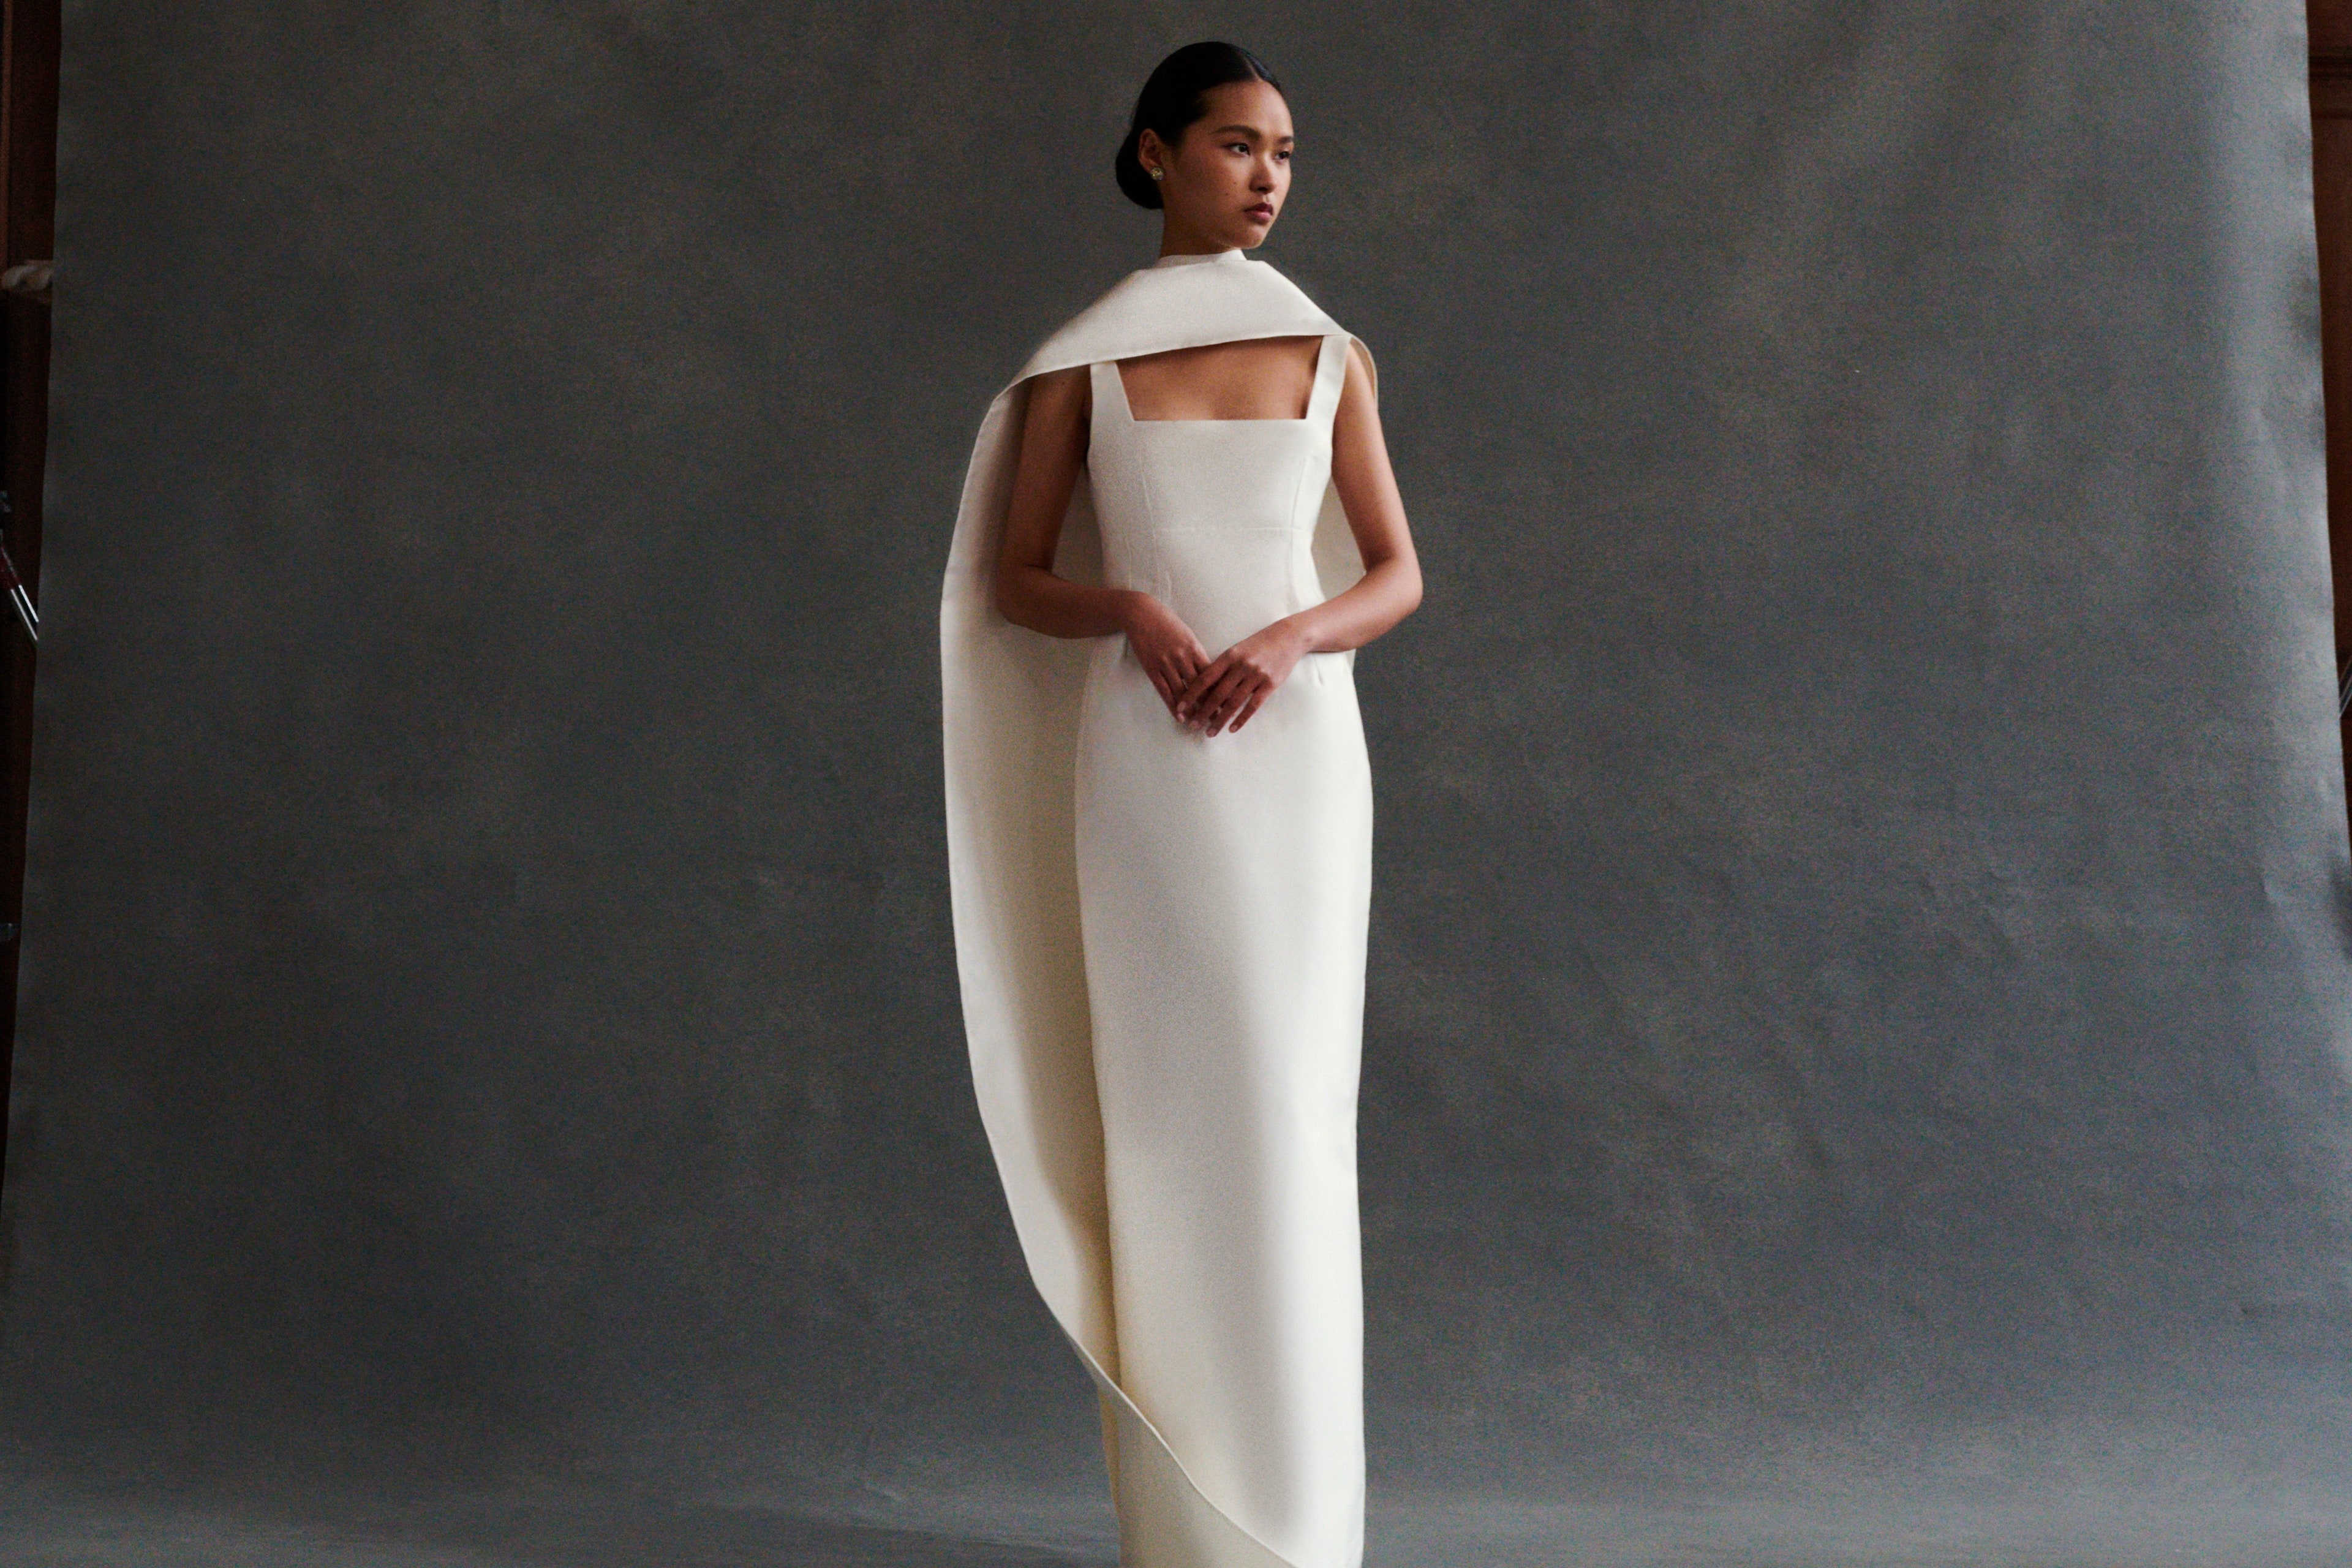 christopher maneri add photo body paint wedding dresses that hide nothing at all